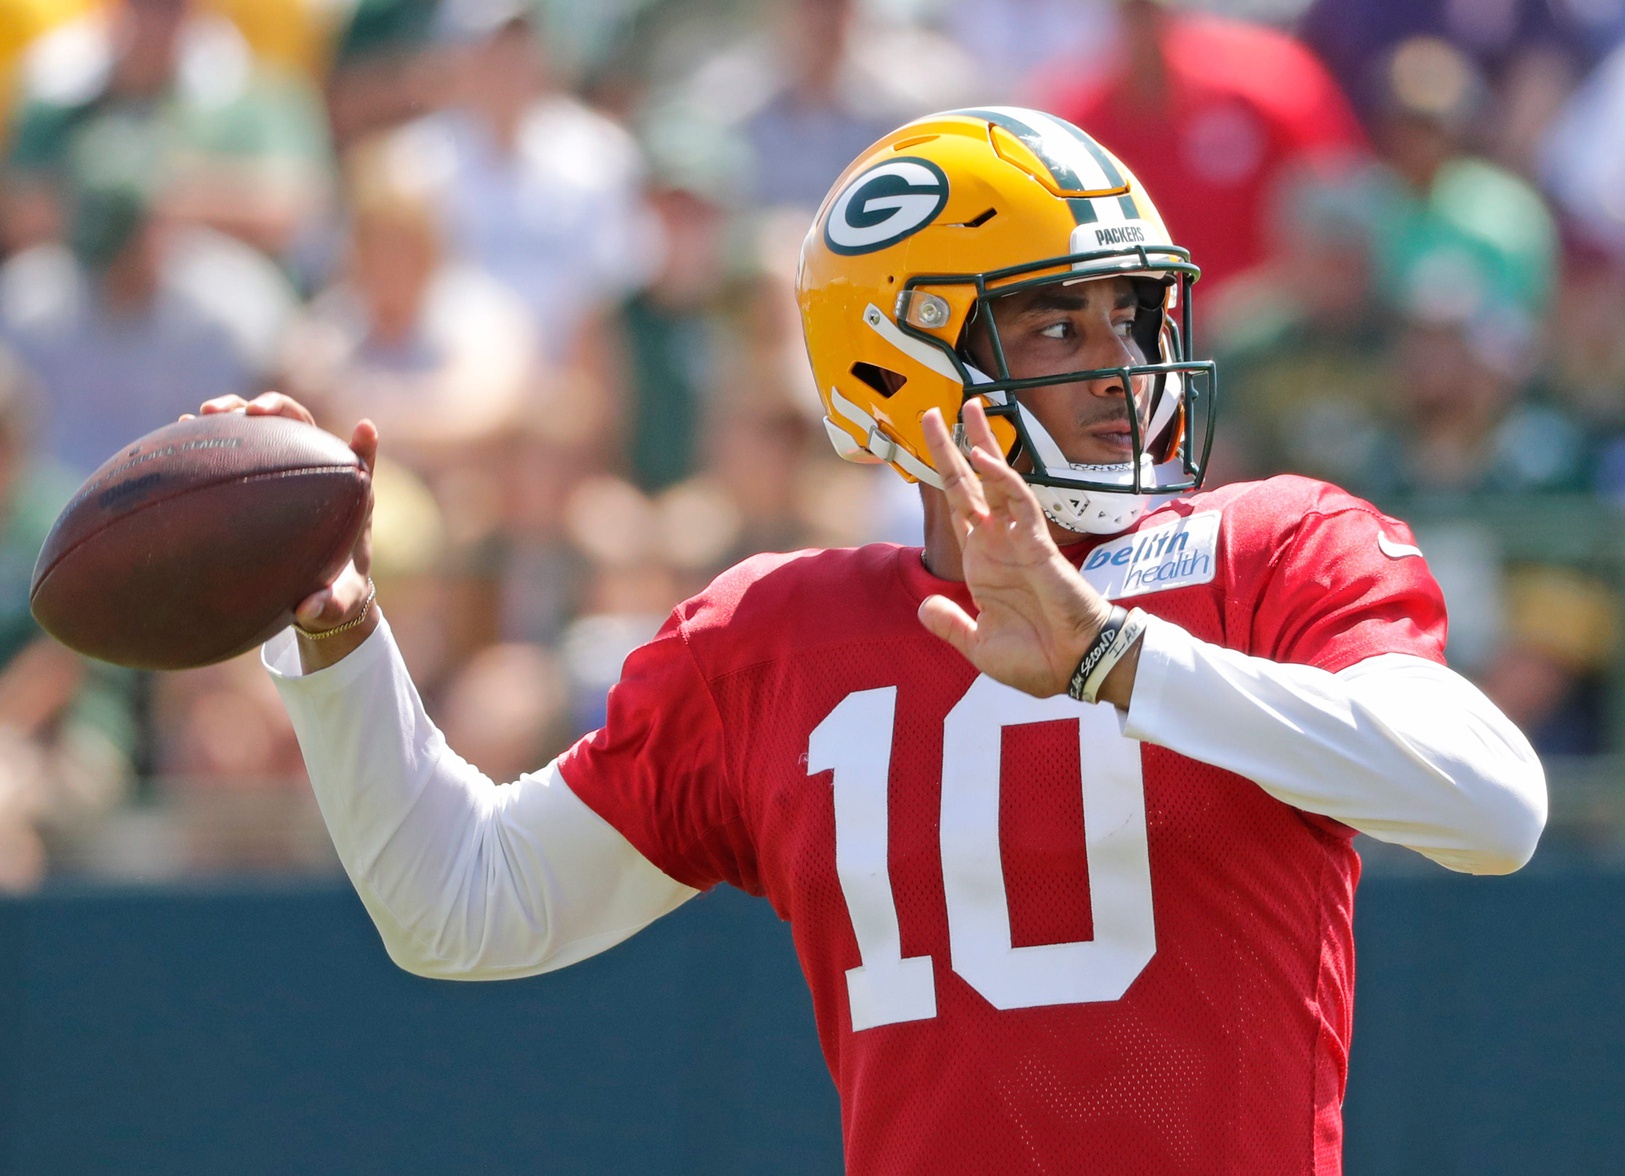 Aaron Rodgers isn't the top rated QB in 'Madden NFL 23'